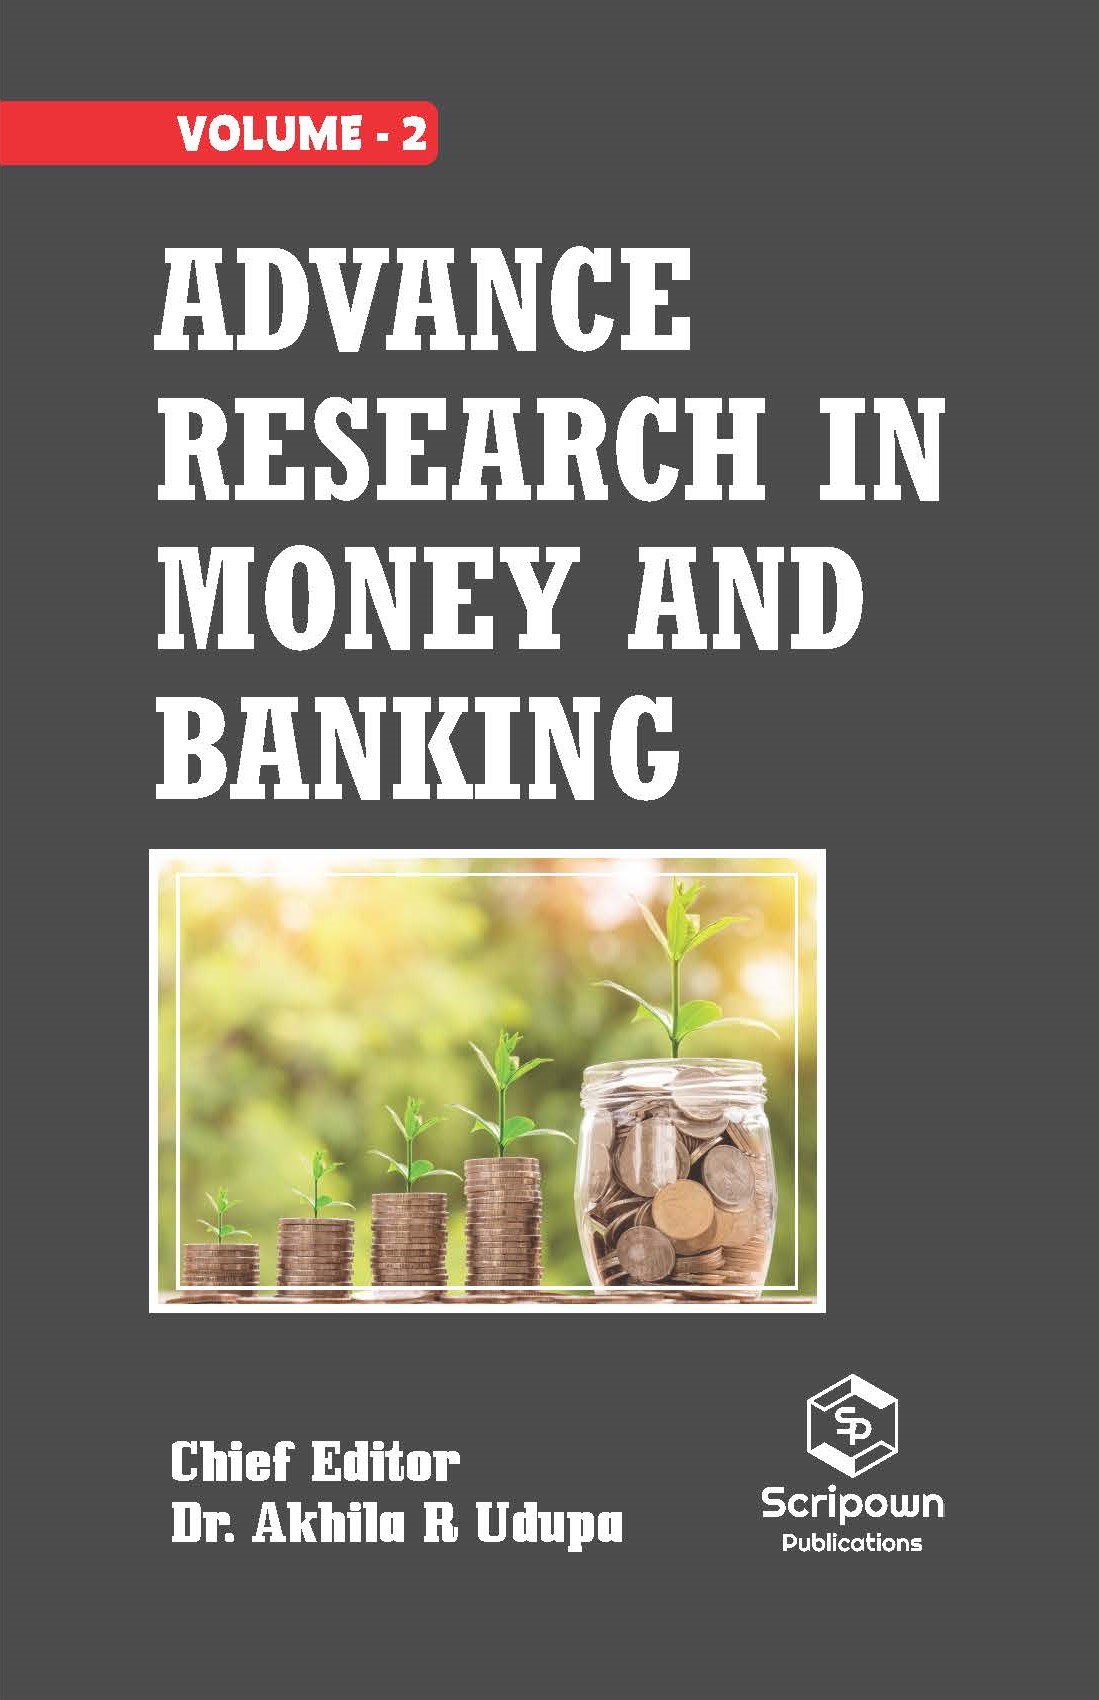 Advance Research in Money and Banking (Volume - 2)